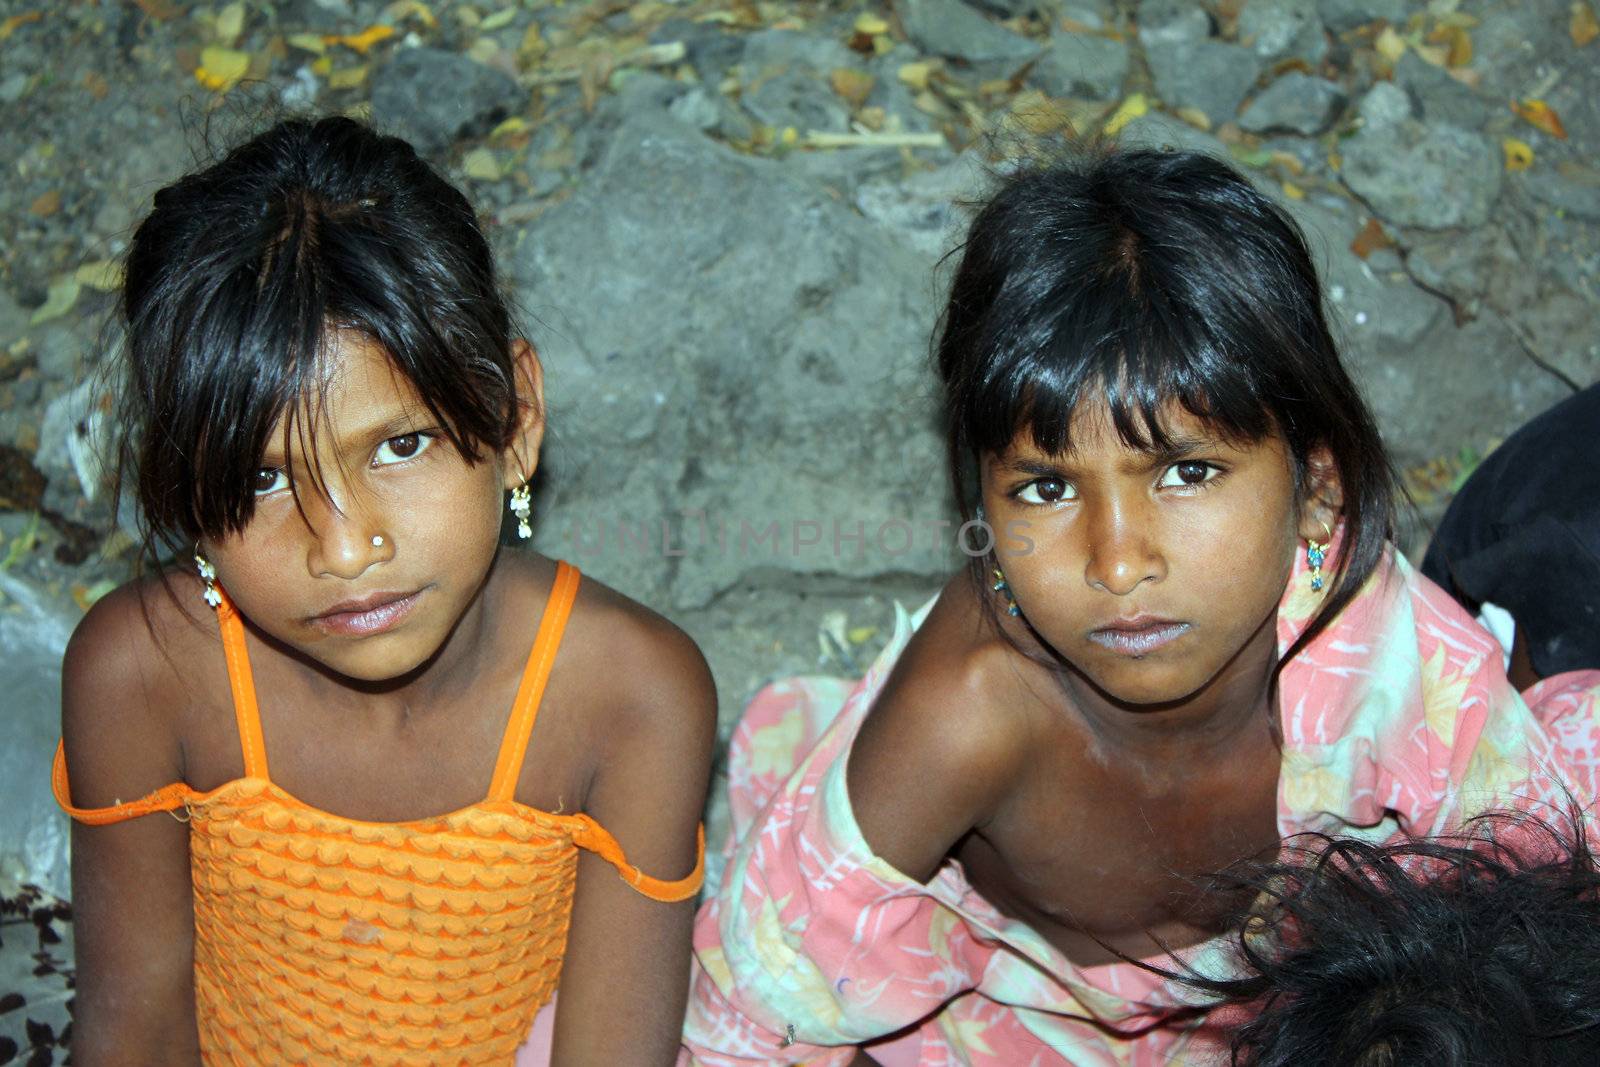 A portrait of two poor sisters from India who mostly spend their day begging on the streets.